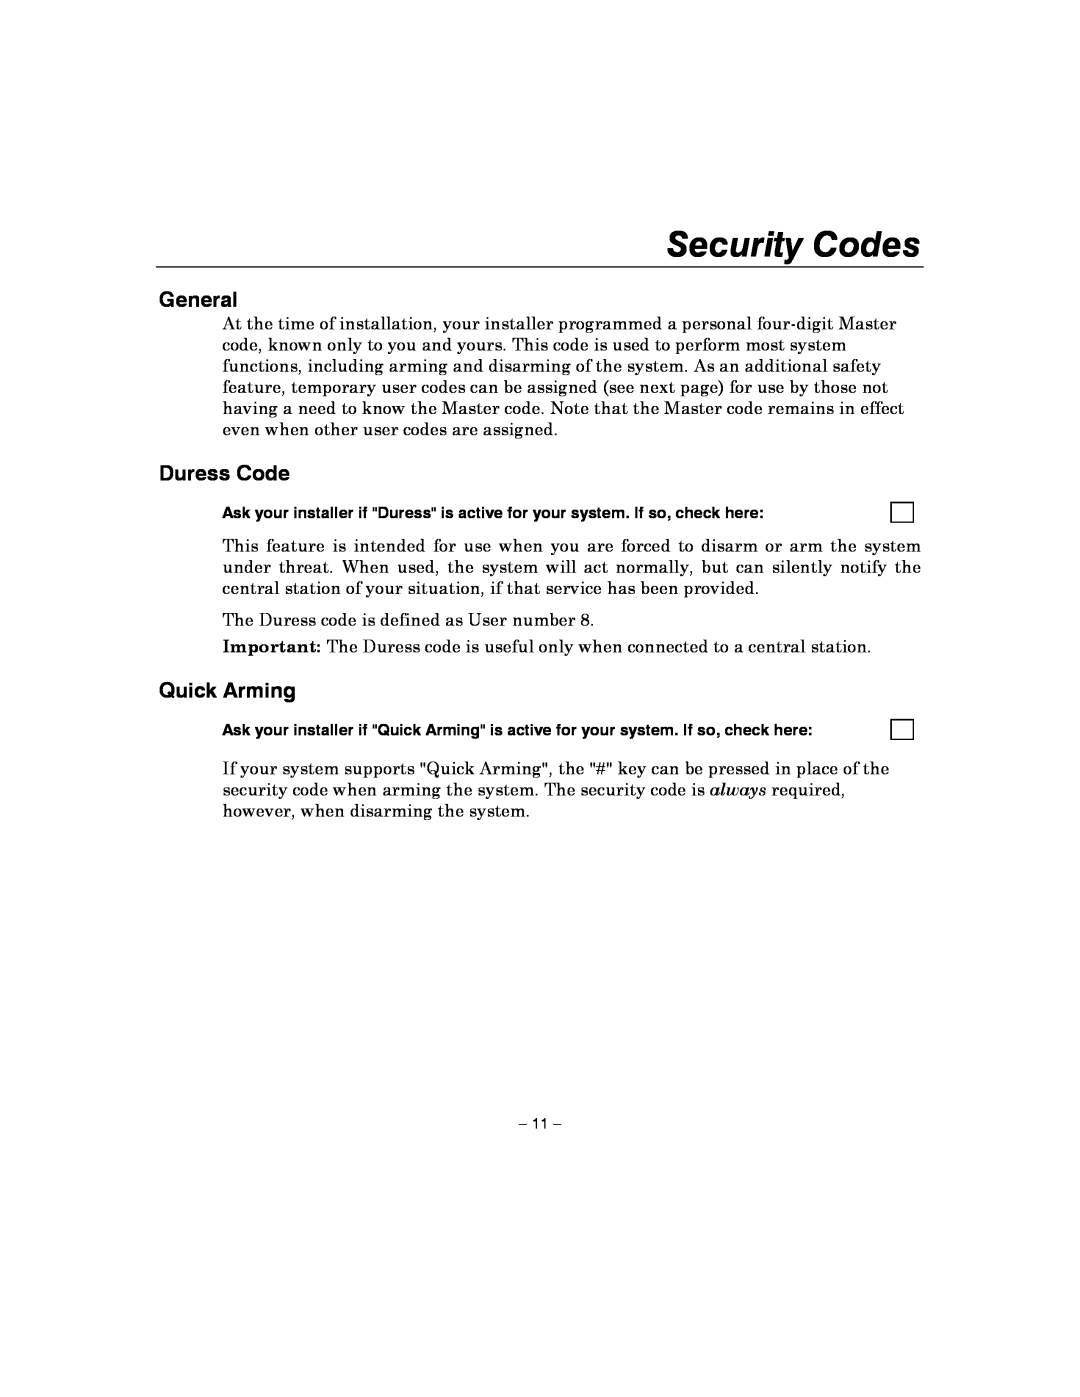 Honeywell 4110XM manual Security Codes, Duress Code, Quick Arming, General 